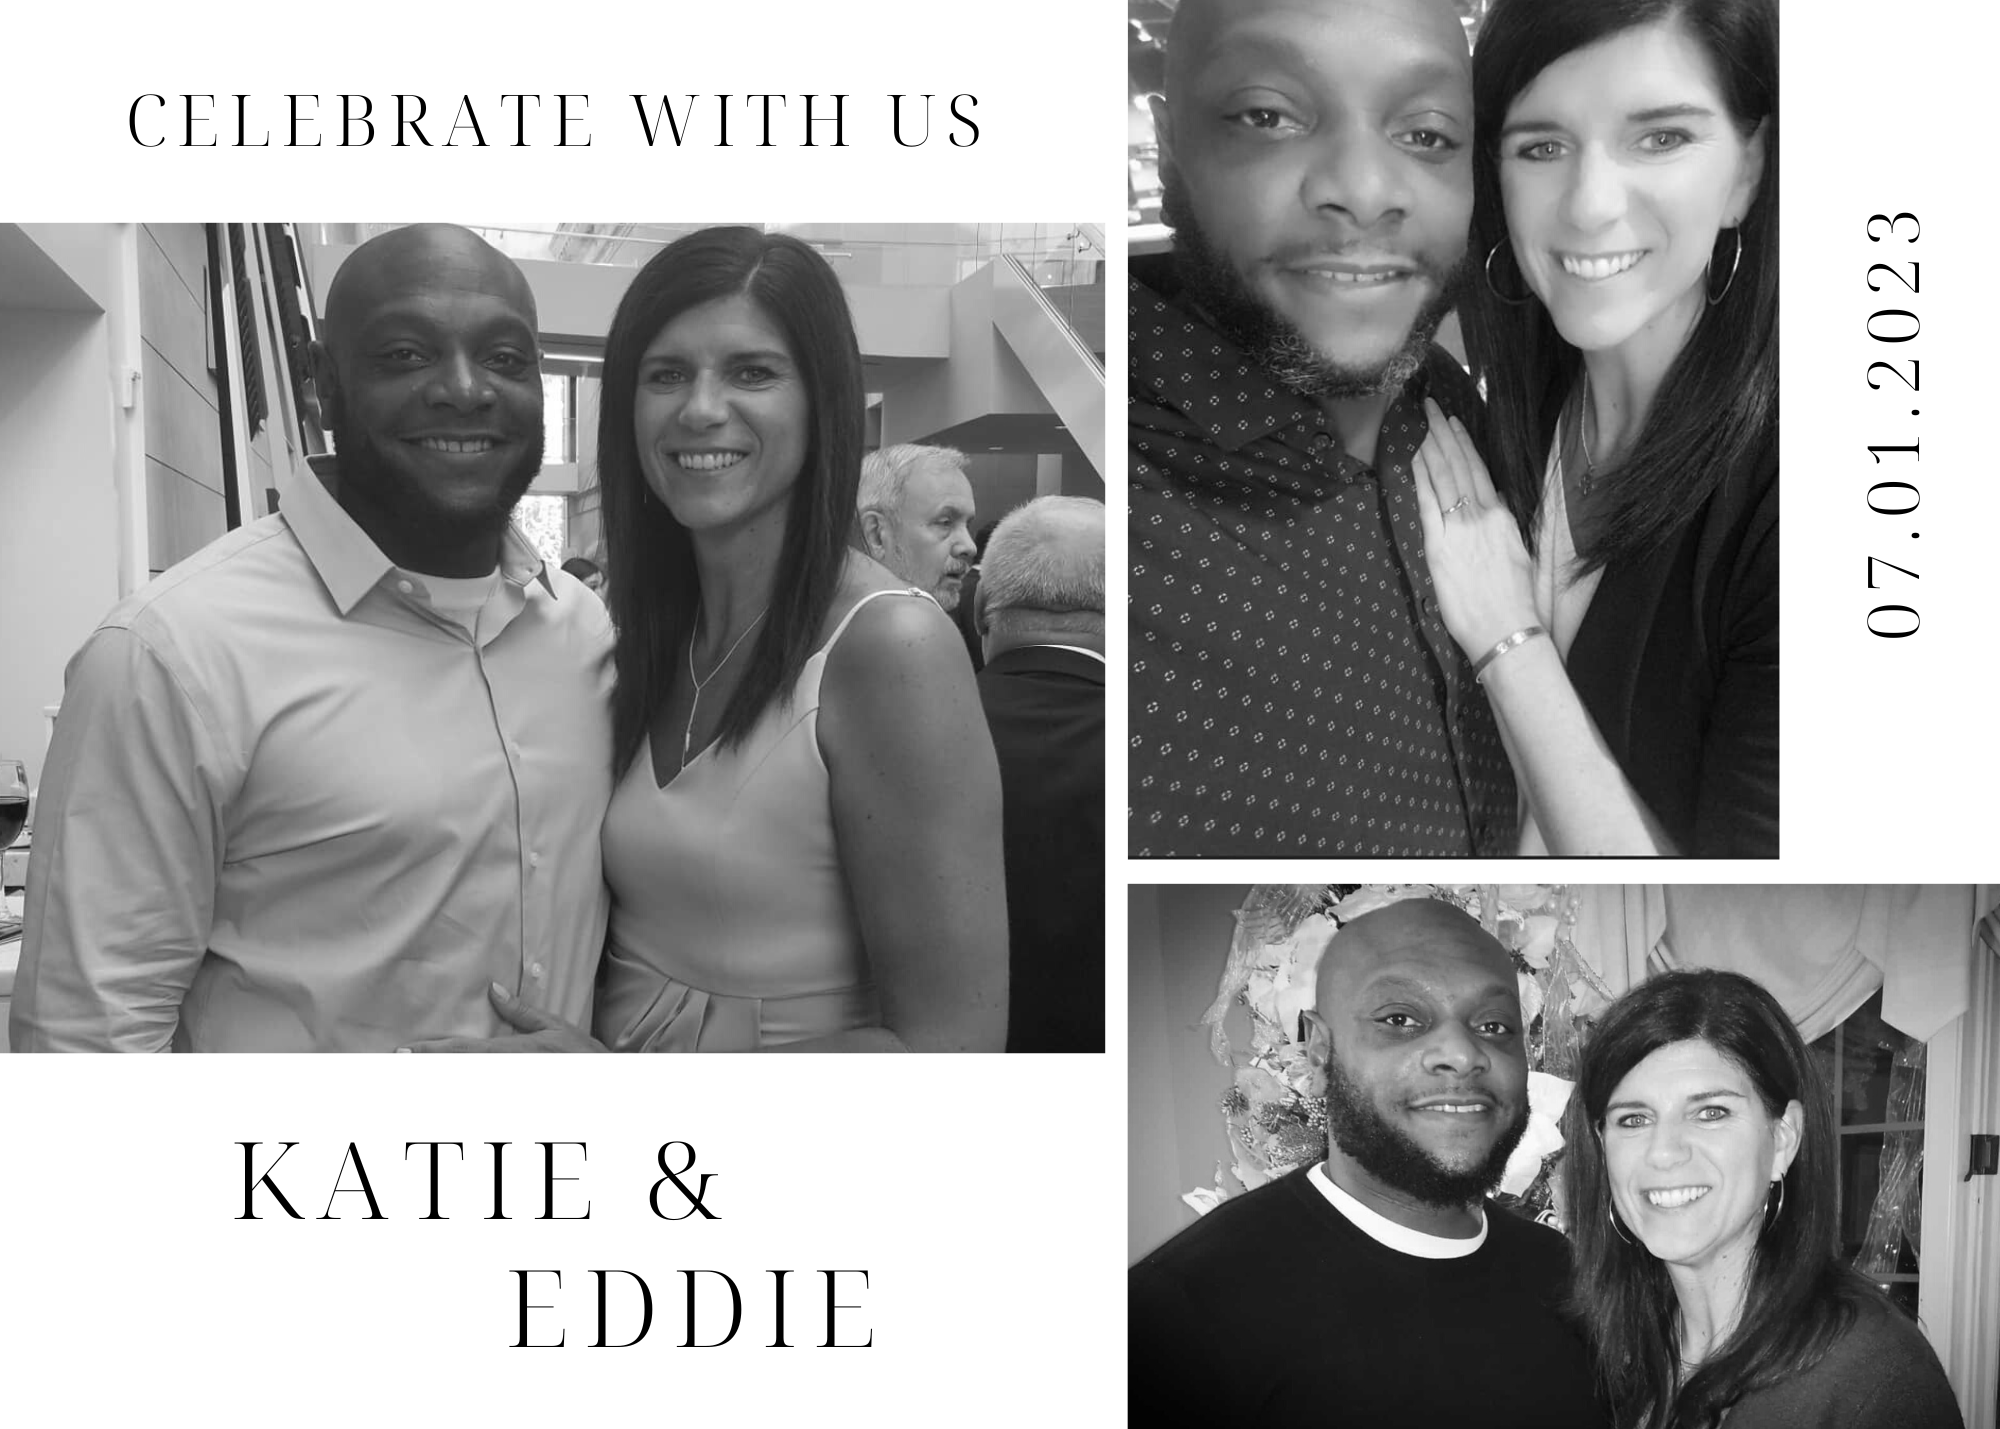 The Wedding Website of Katie Young and Eddie McMillian